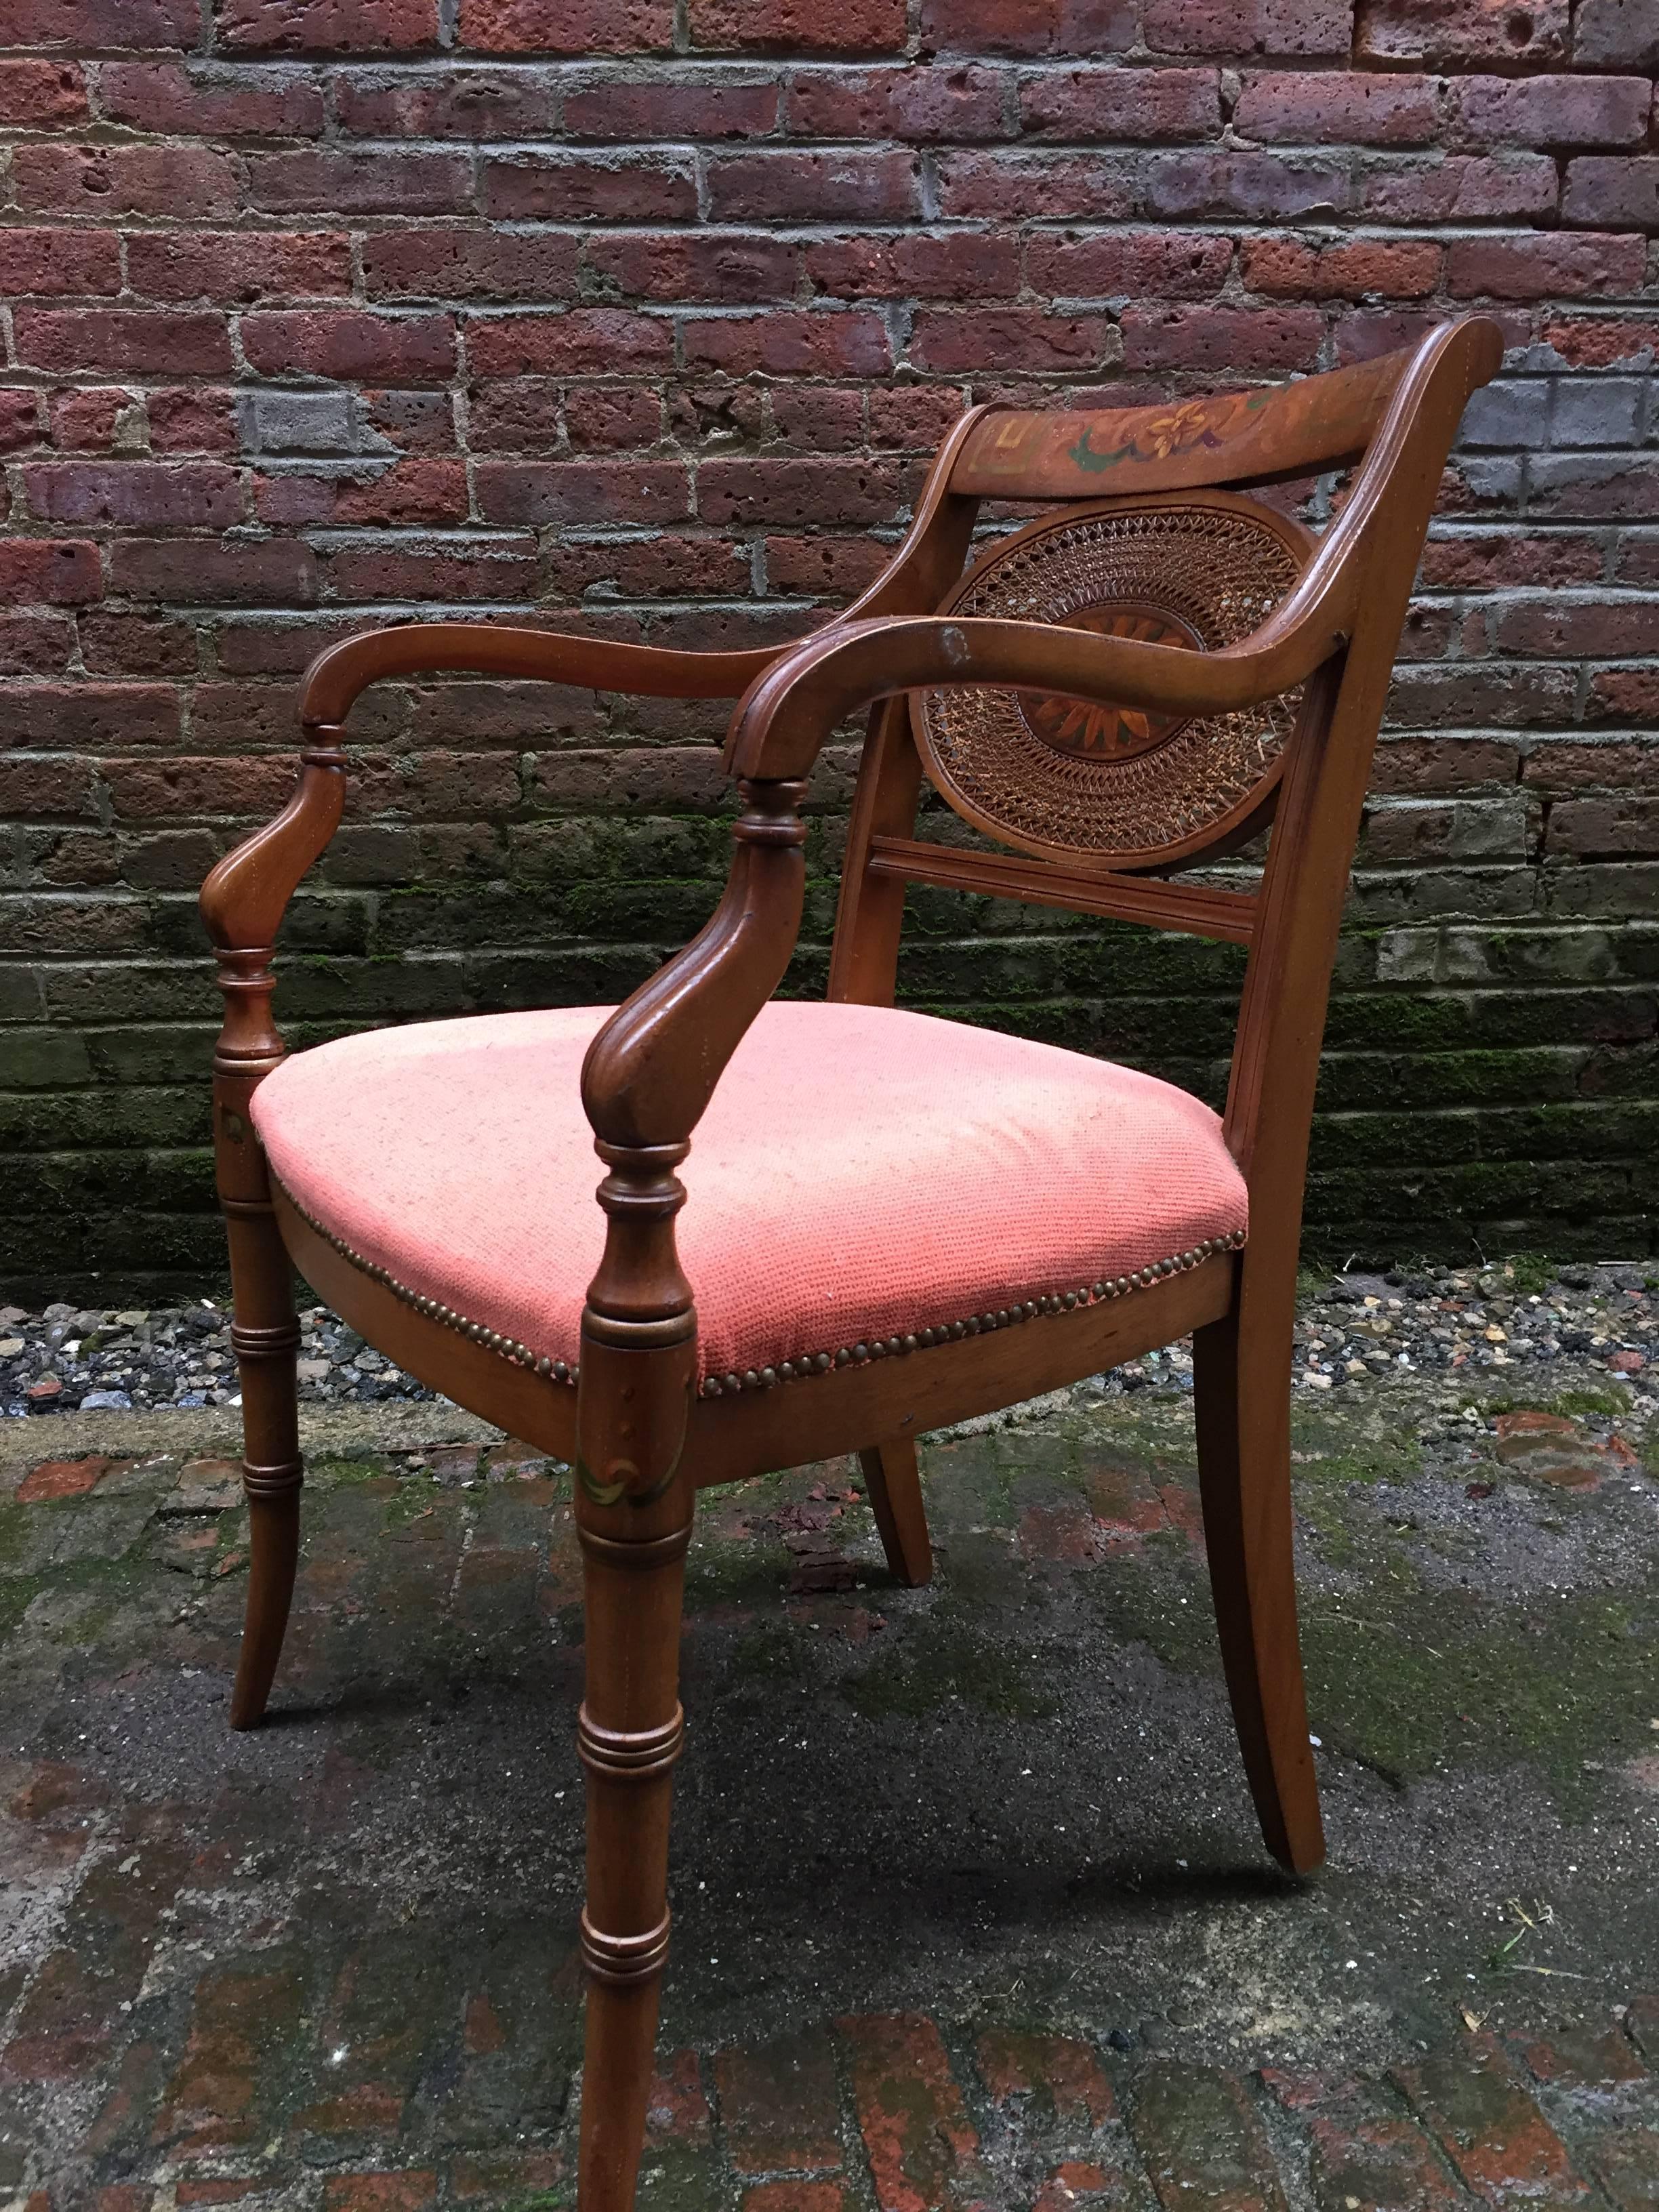 Fine pair of hand-painted Adam style caned and scroll armchairs after the neoclassical style made famous by James and Robert Adam. Decorated with a sunflower and caned back splat. Solid wood construction, circa 1960. Unsigned.